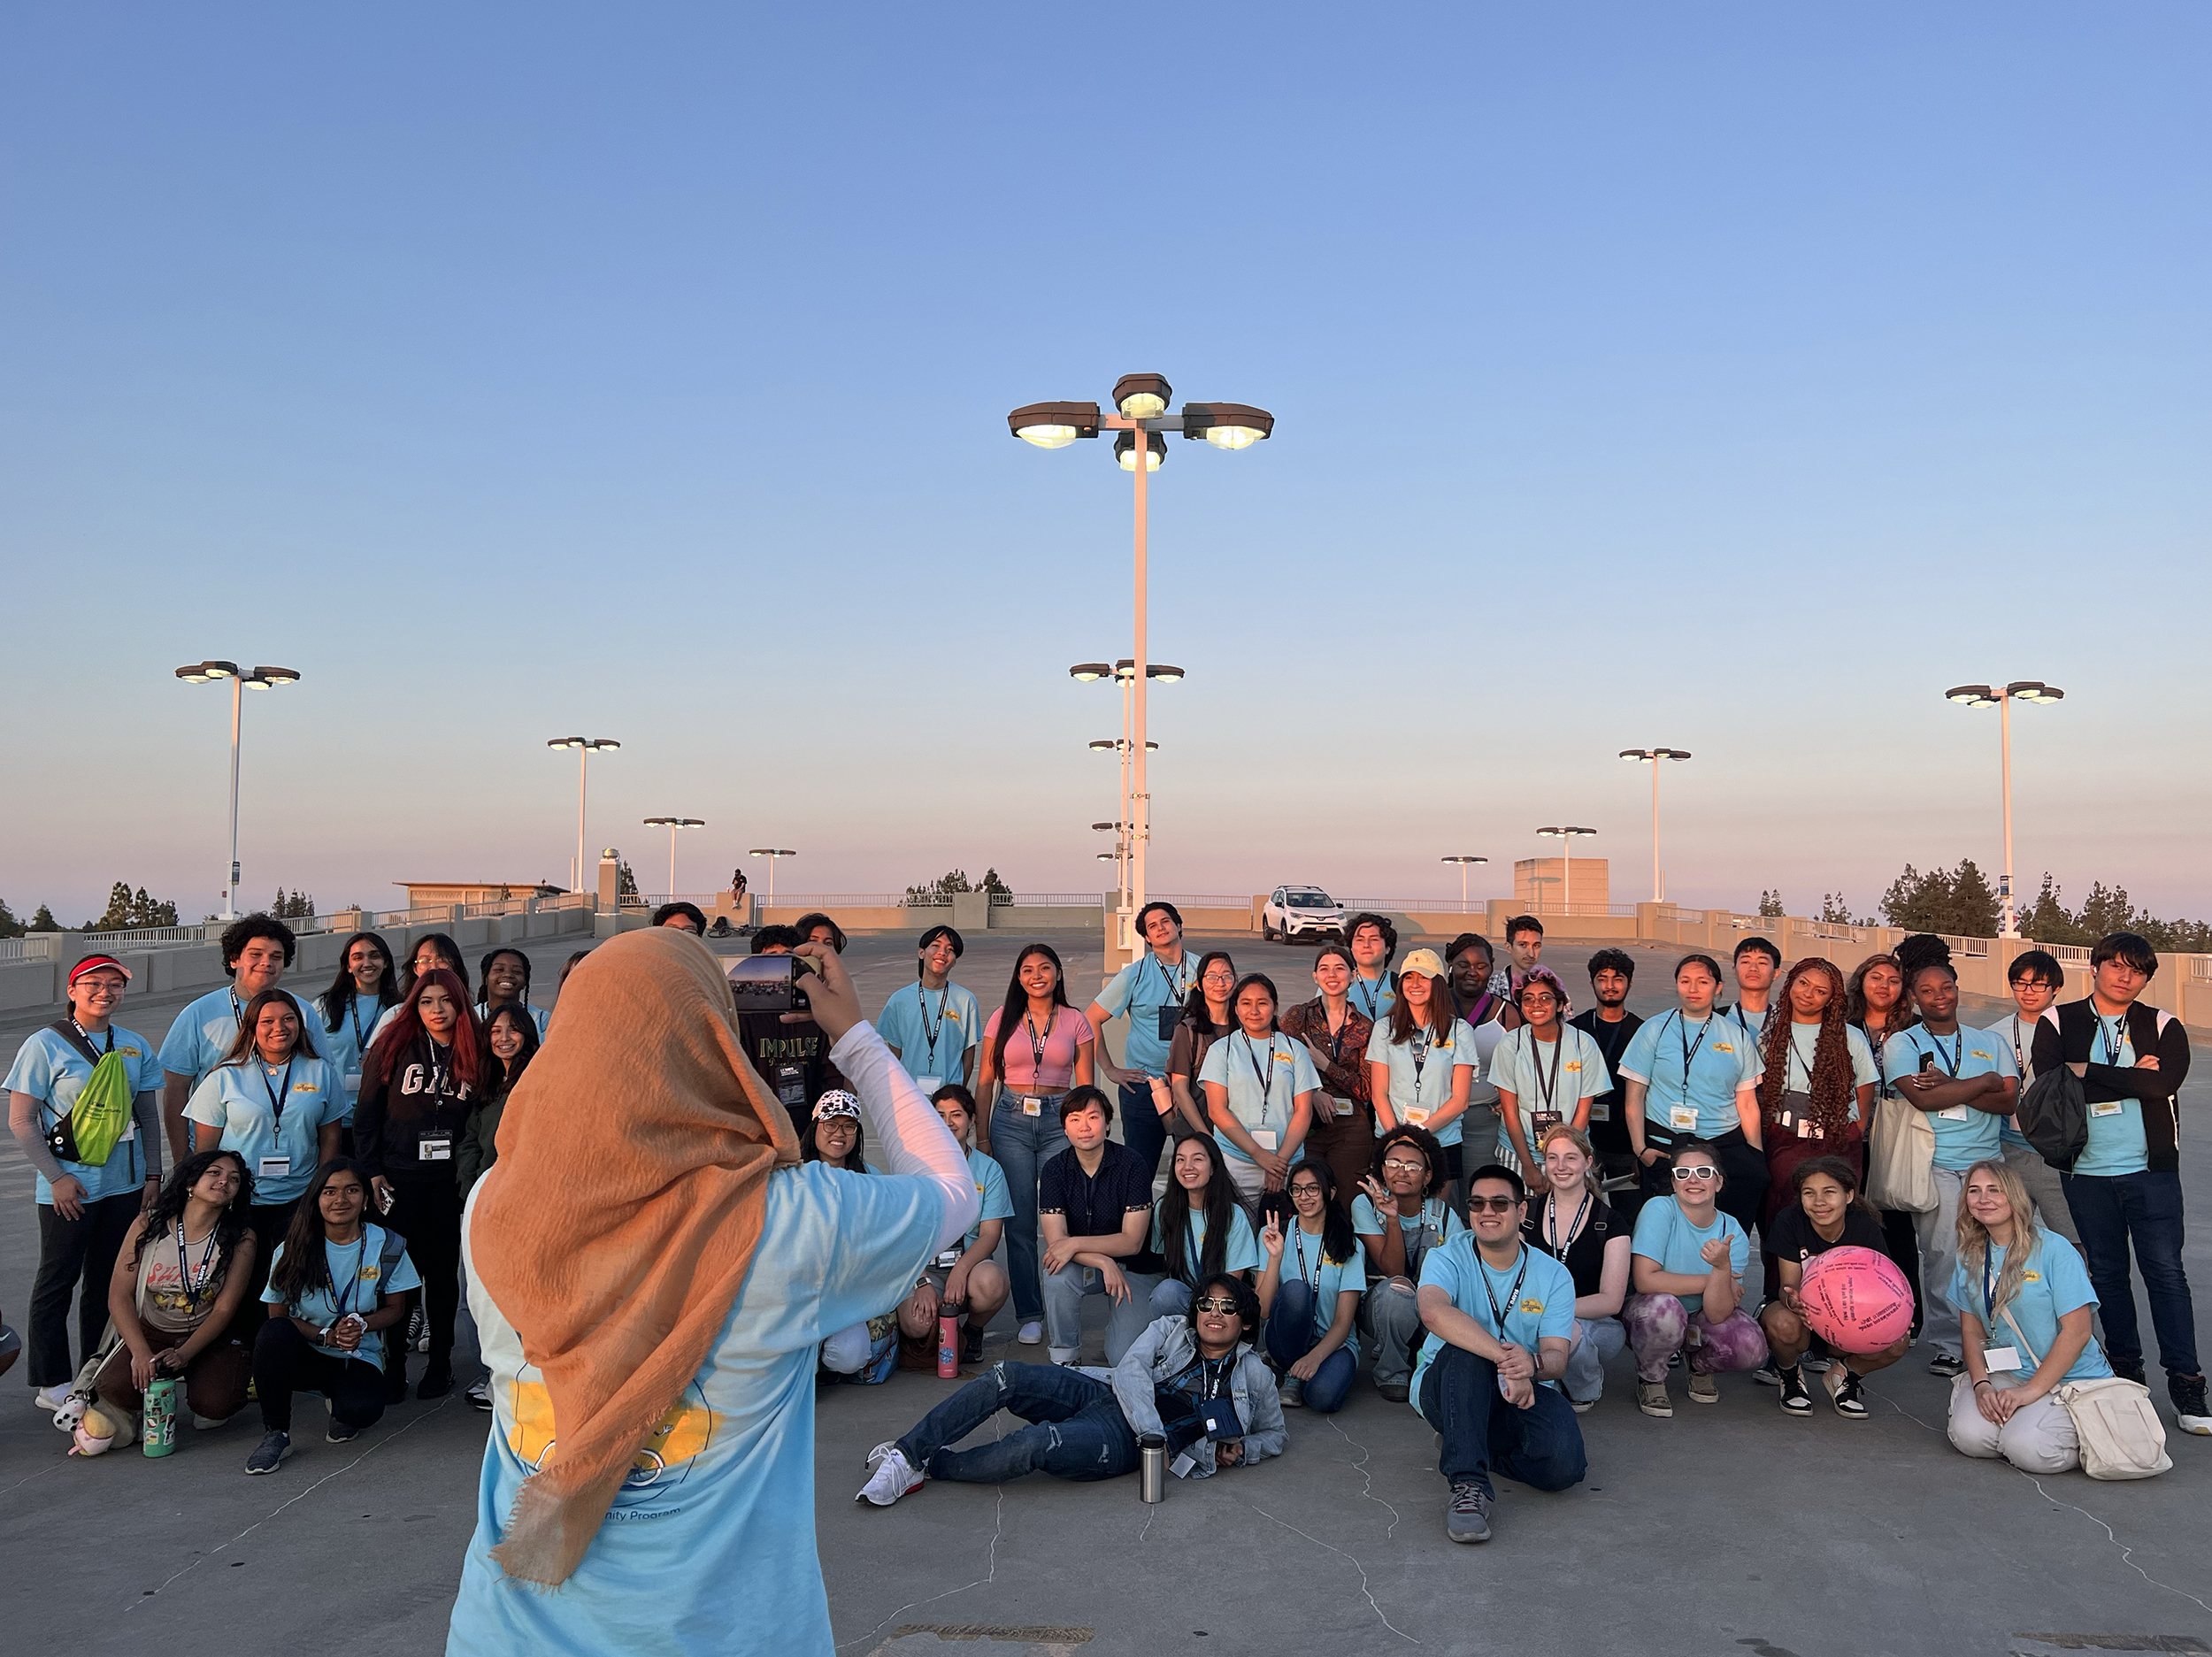 Students pose for a group shot while a person wearing a headscarf takes a picture